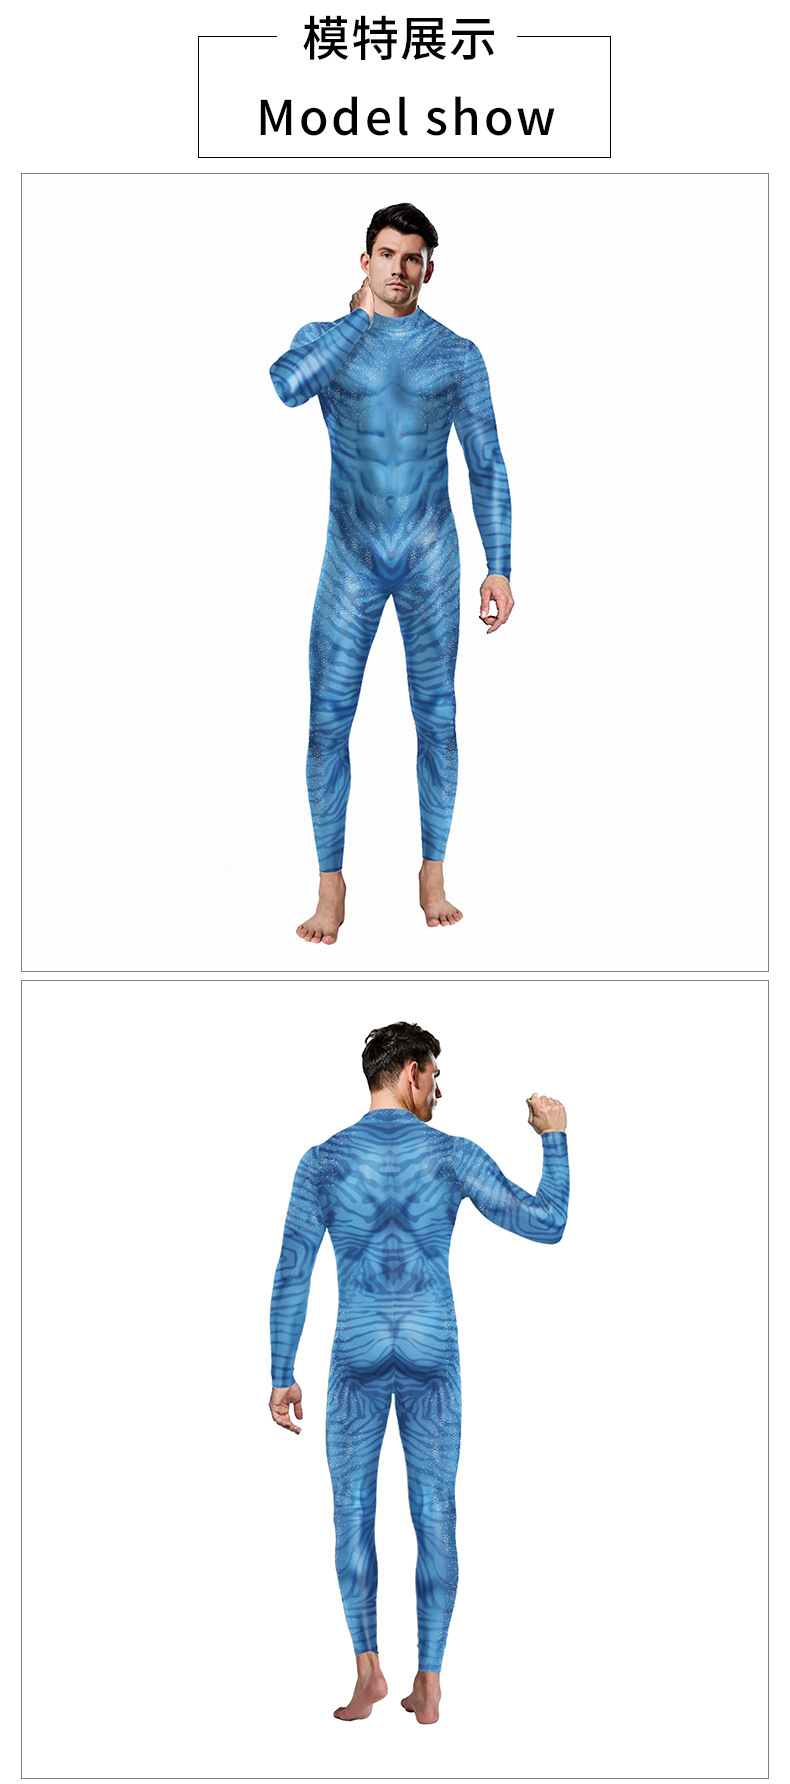 Movie Costume Avatar 2 The Way of Water Jake Sully Cosplay Jumpsuit Halloween - Model Show